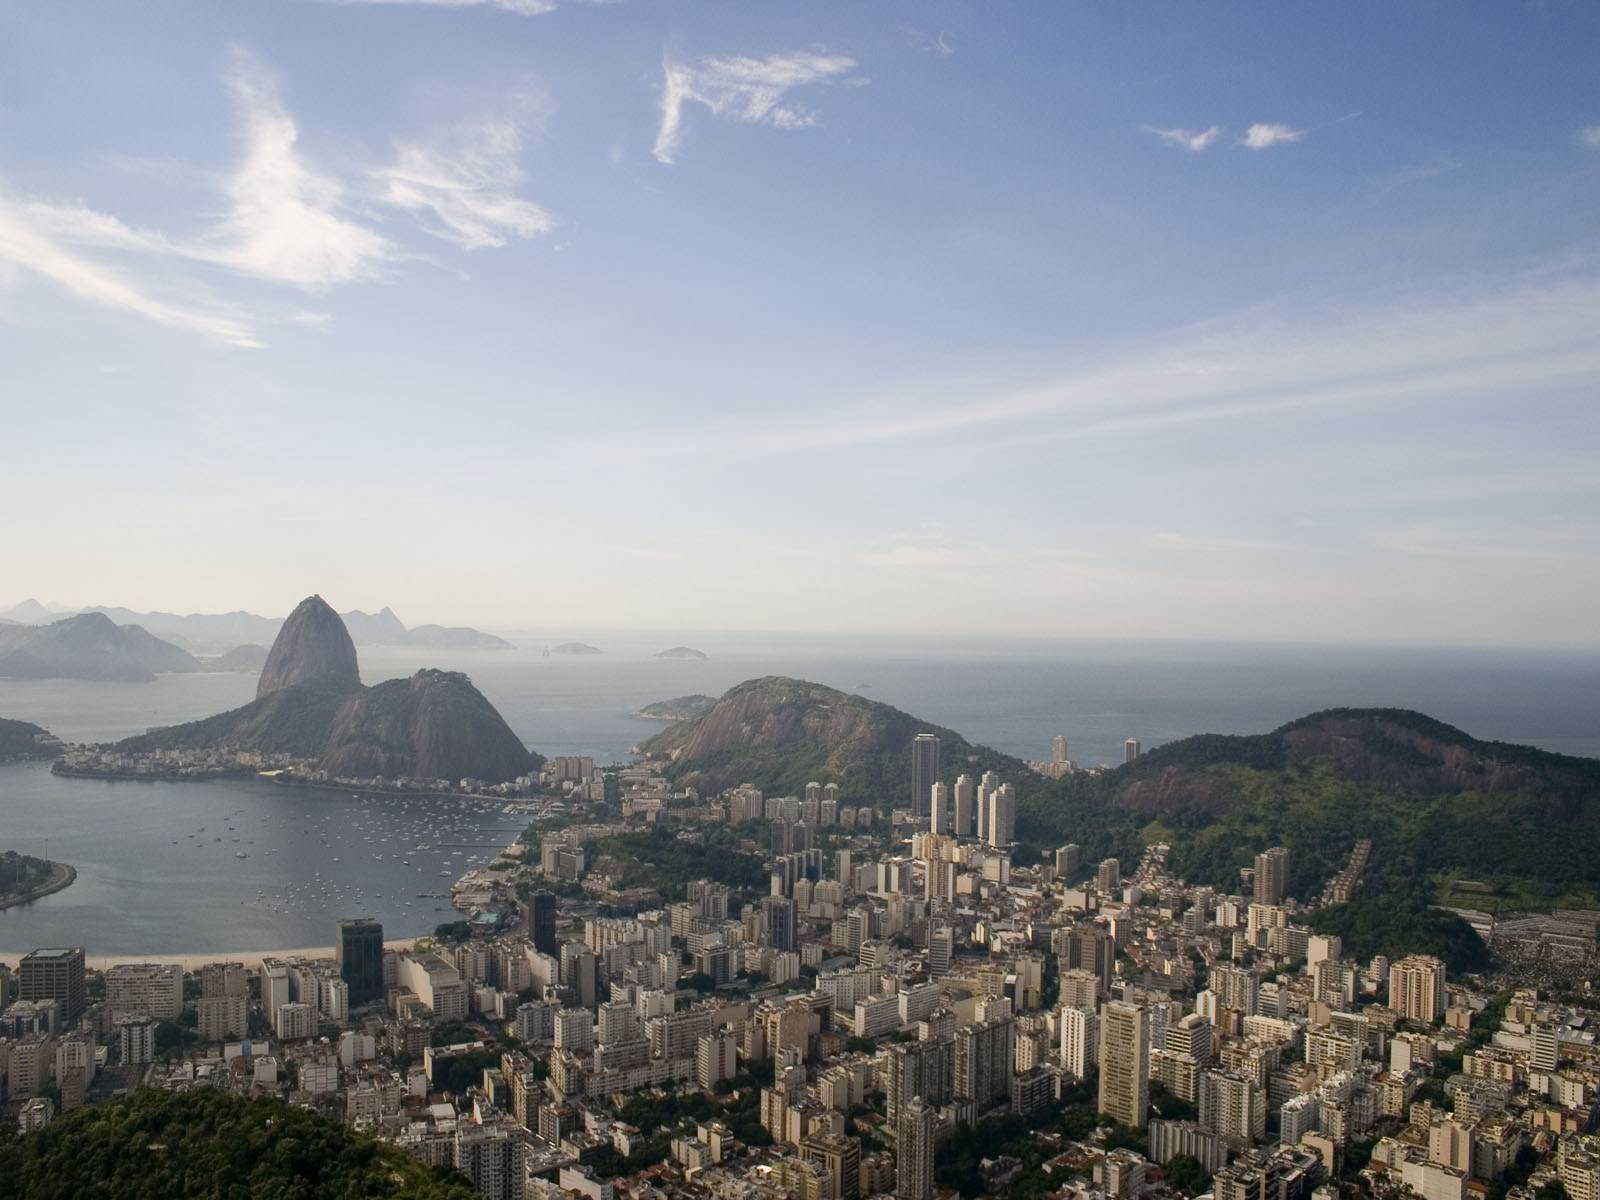 Bresil Brazil From Top of Corcovado